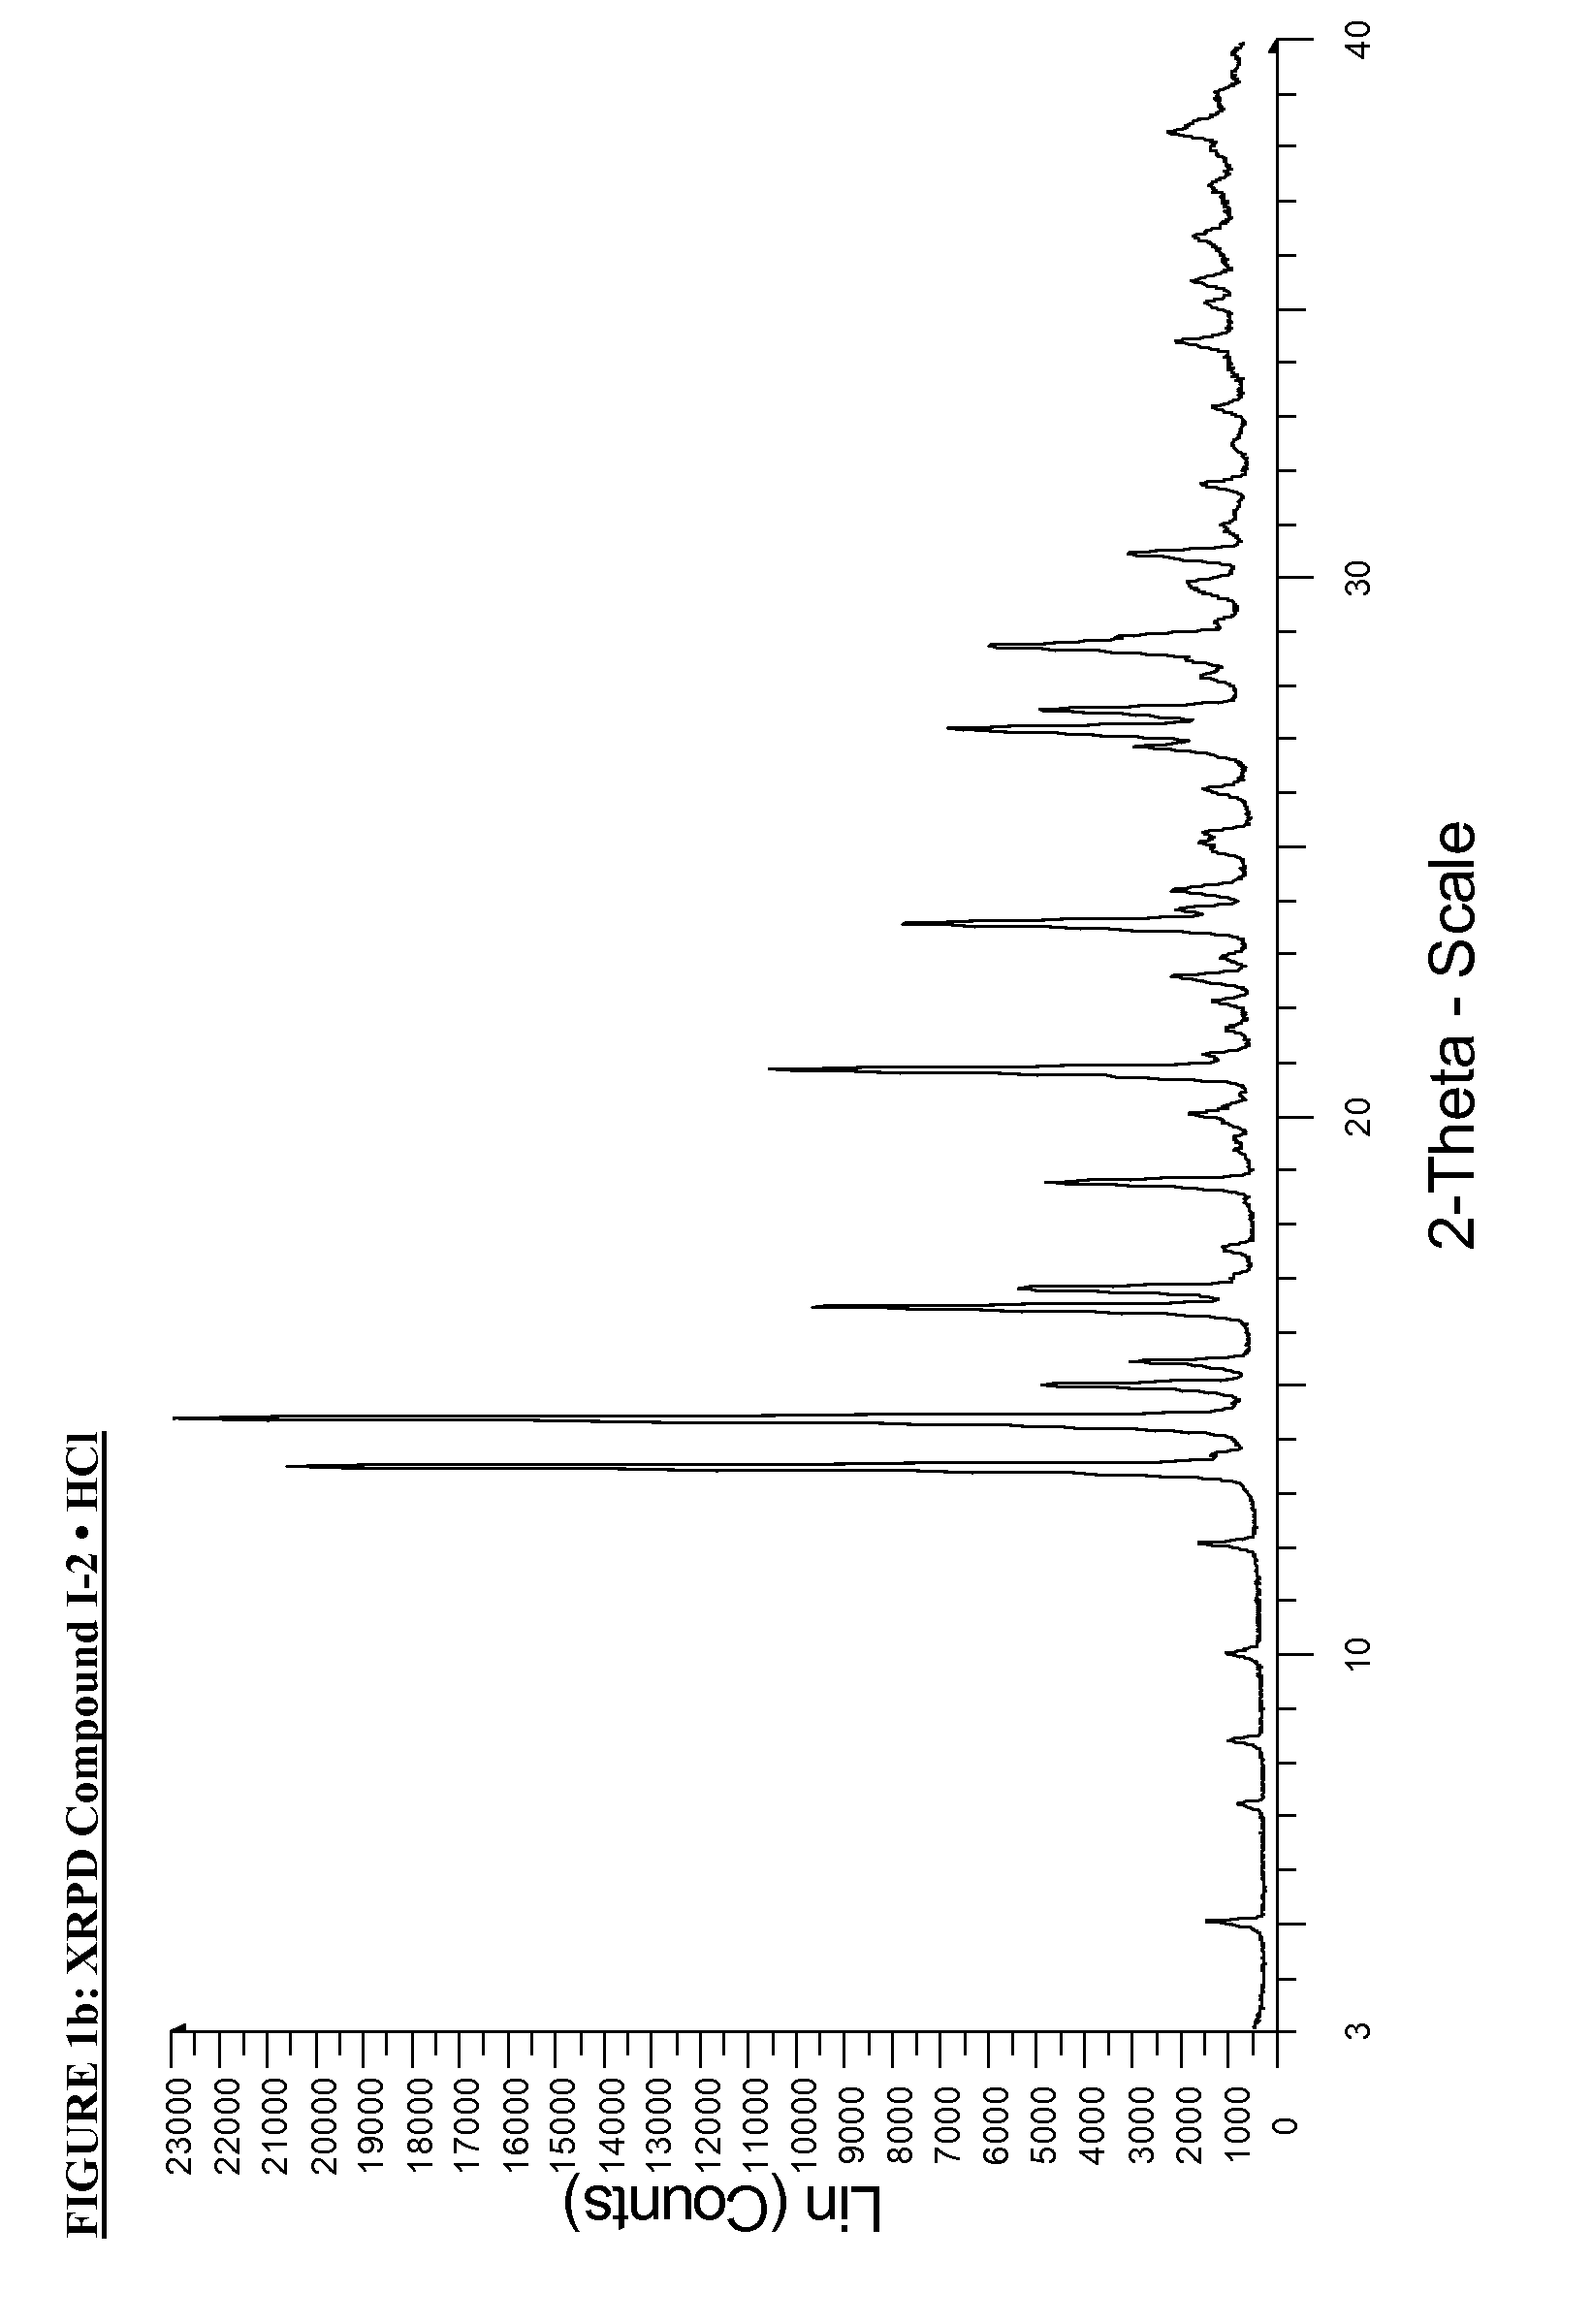 Processes for making compounds useful as inhibitors of ATR kinase